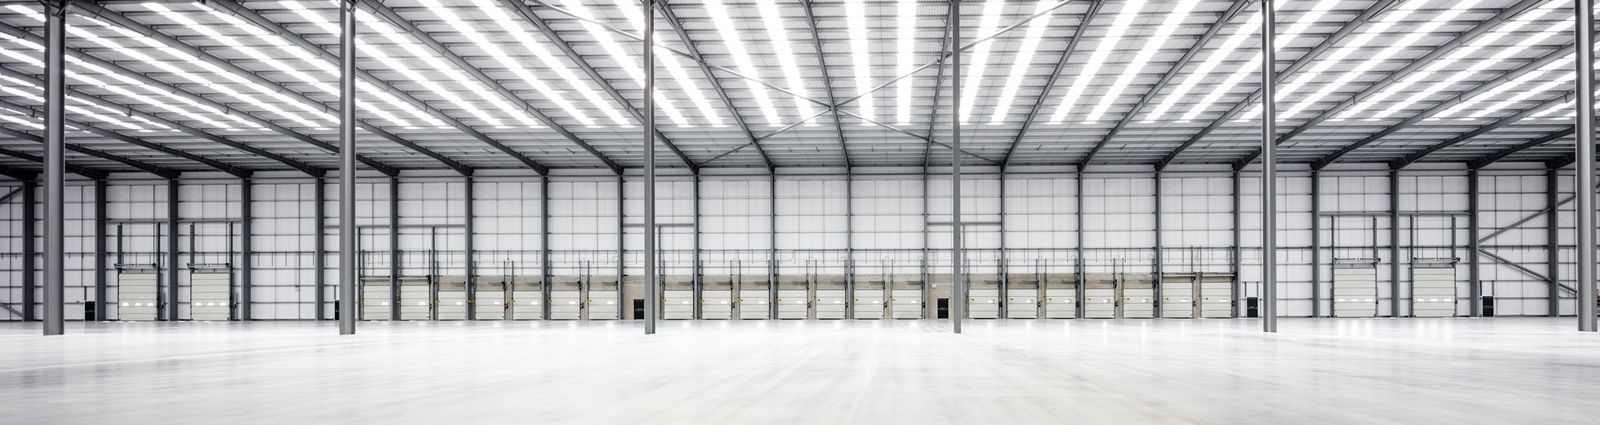 Ergo Real Estate completes the acquisition of four major industrial projects to deliver over 1.1 million sq ft of logistics space over the next 12 months.